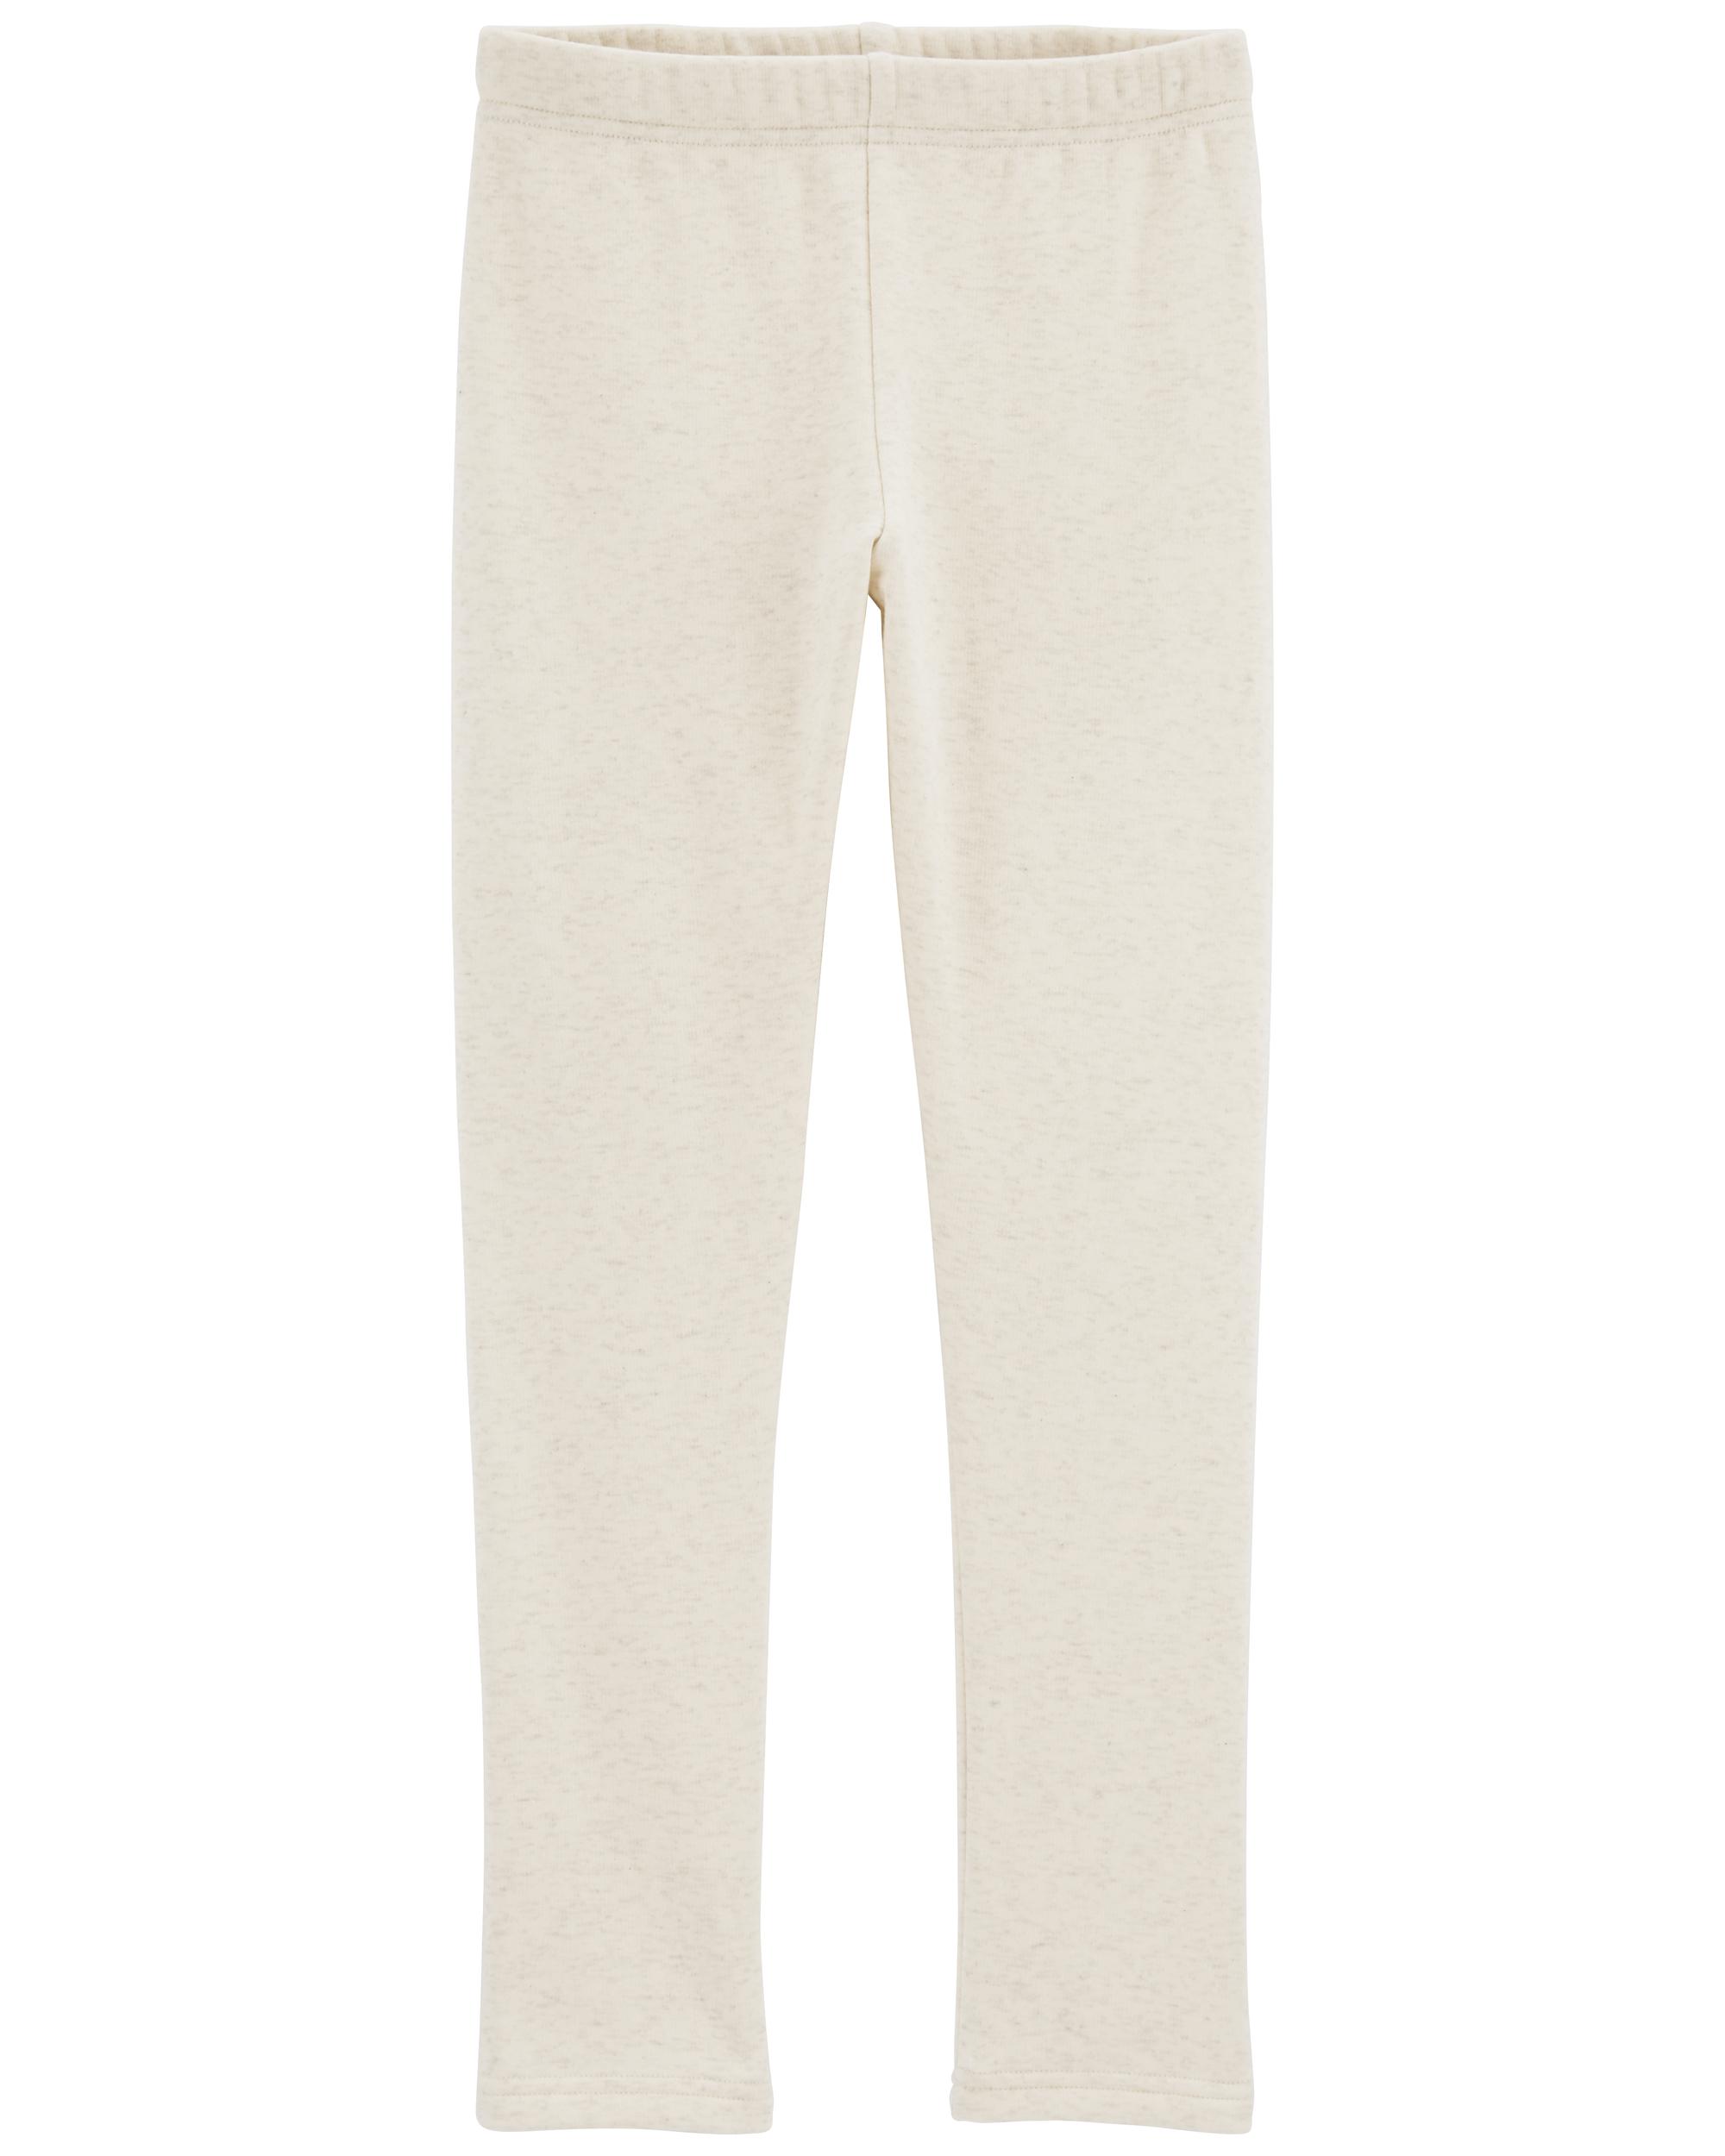 Buy Off White Leggings & Trackpants for Women by MAMA & BEBE Online